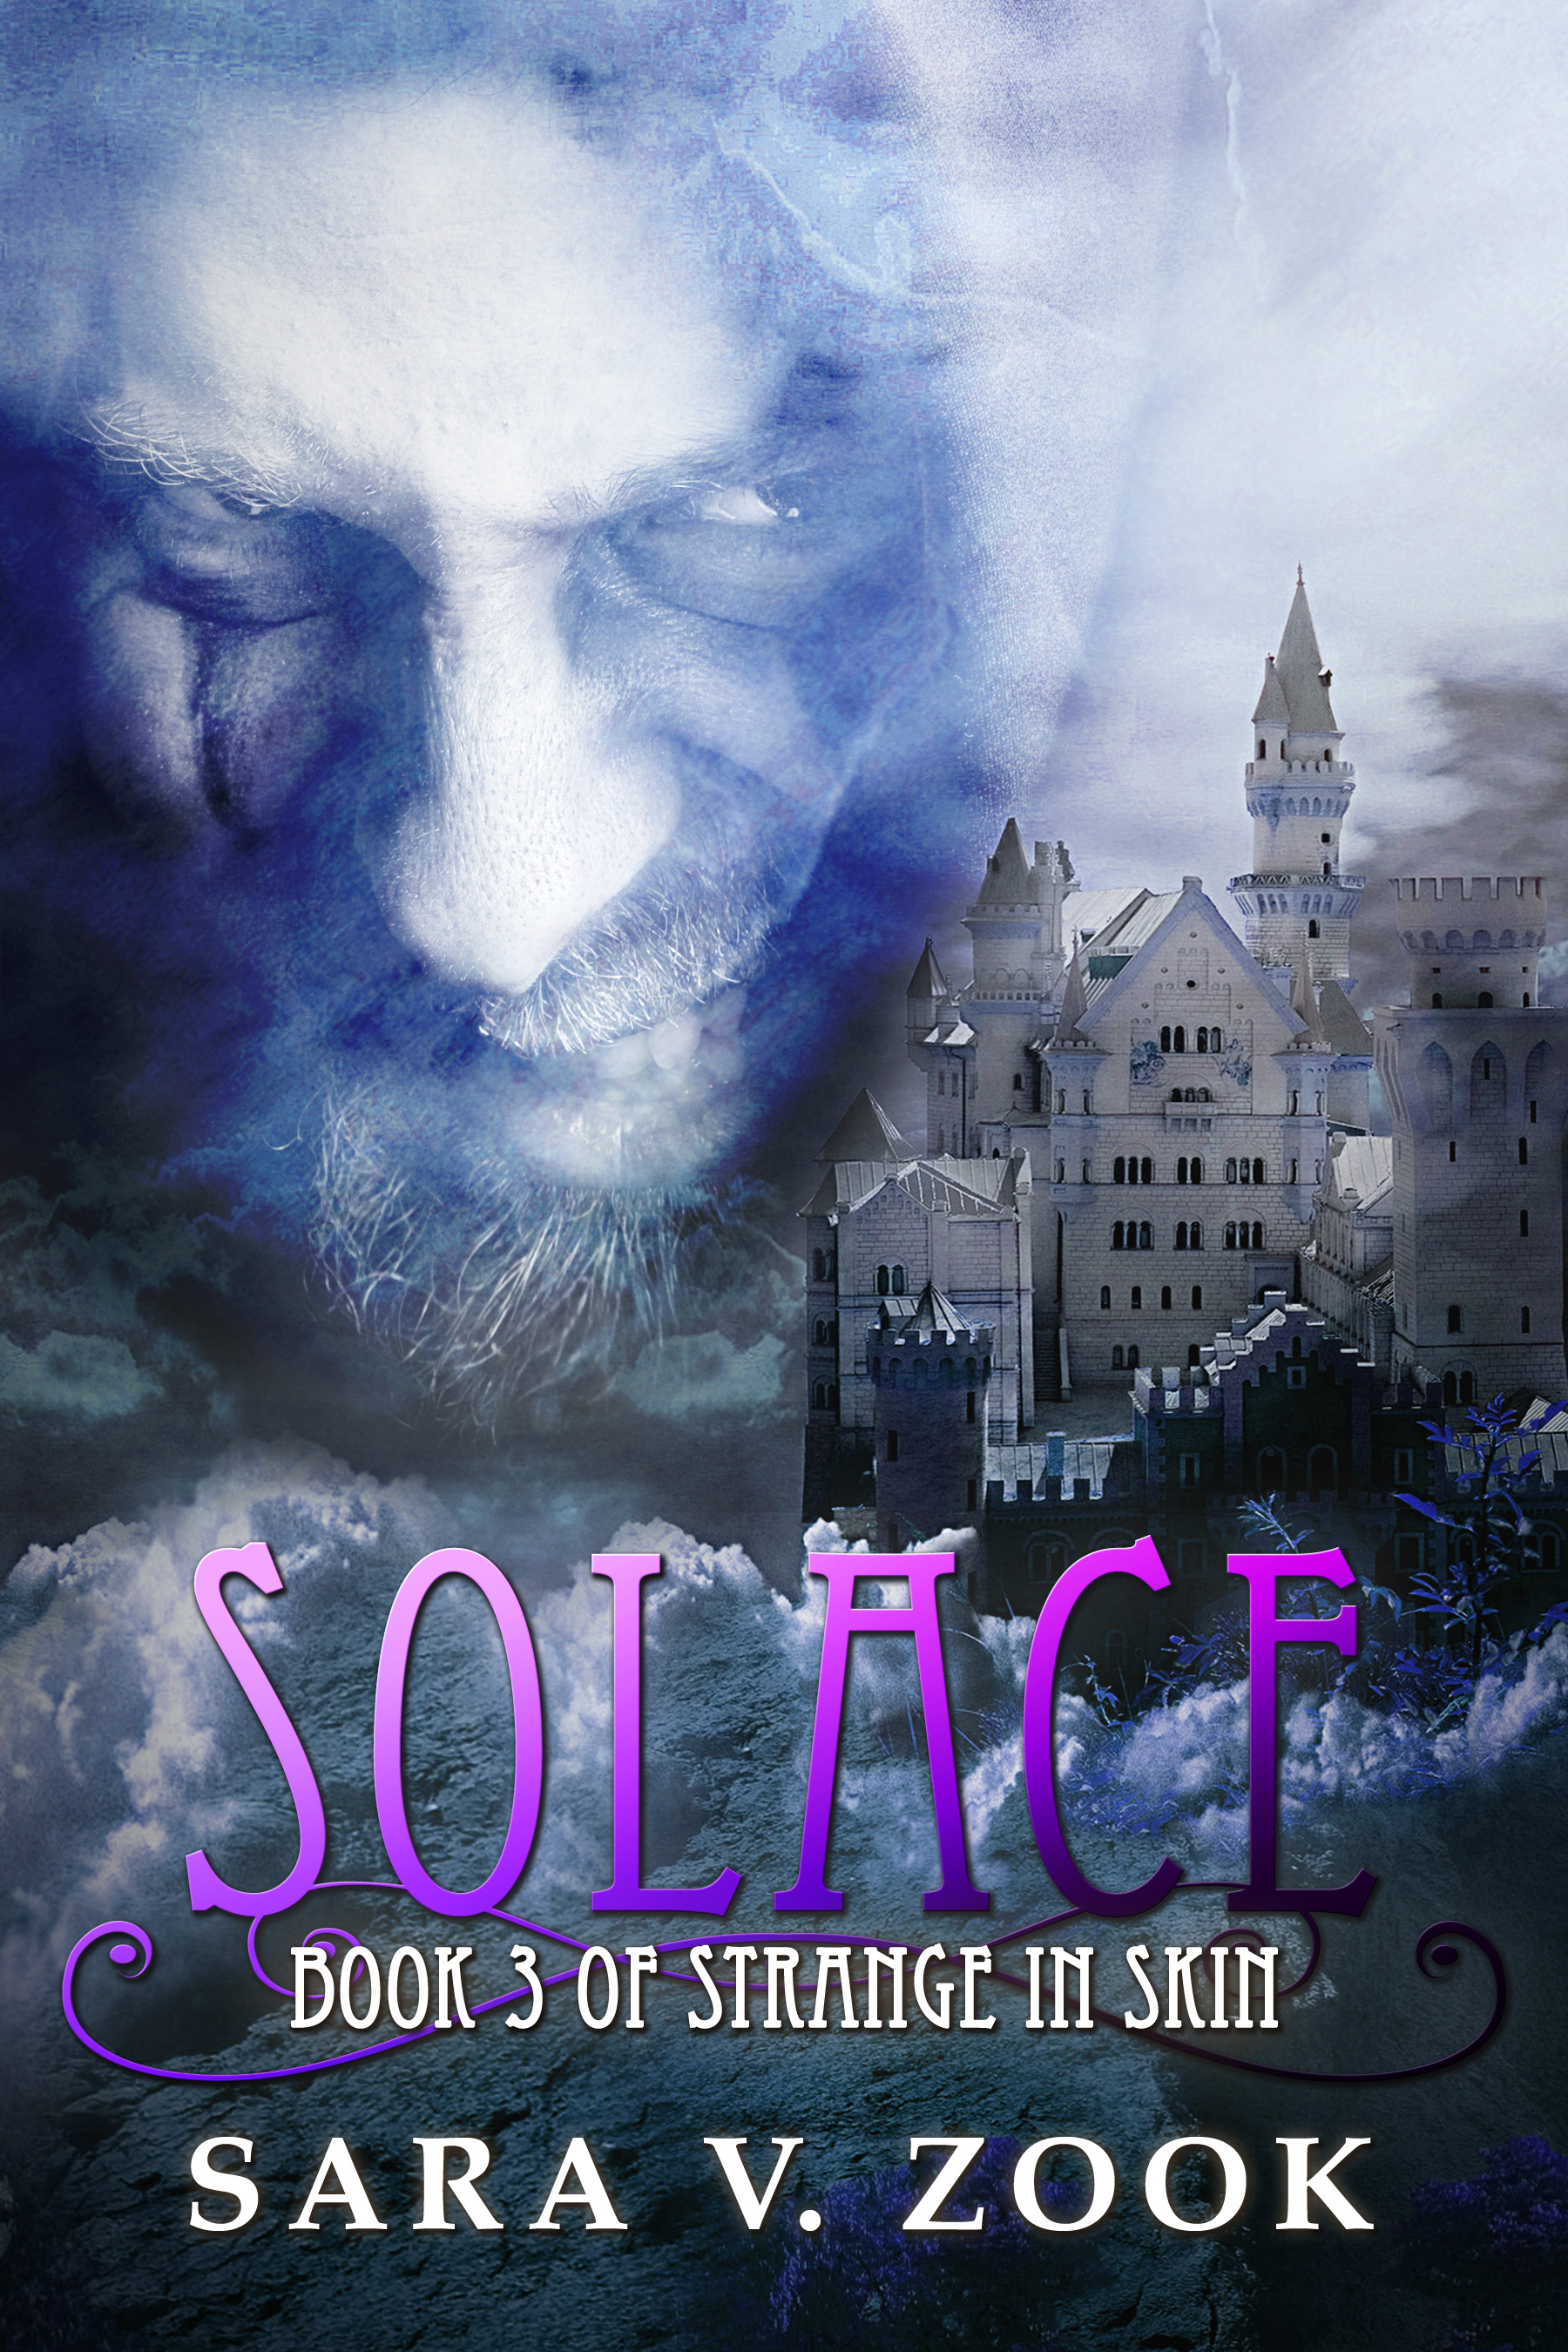 Solace - Book 3, by Sara V. Zook